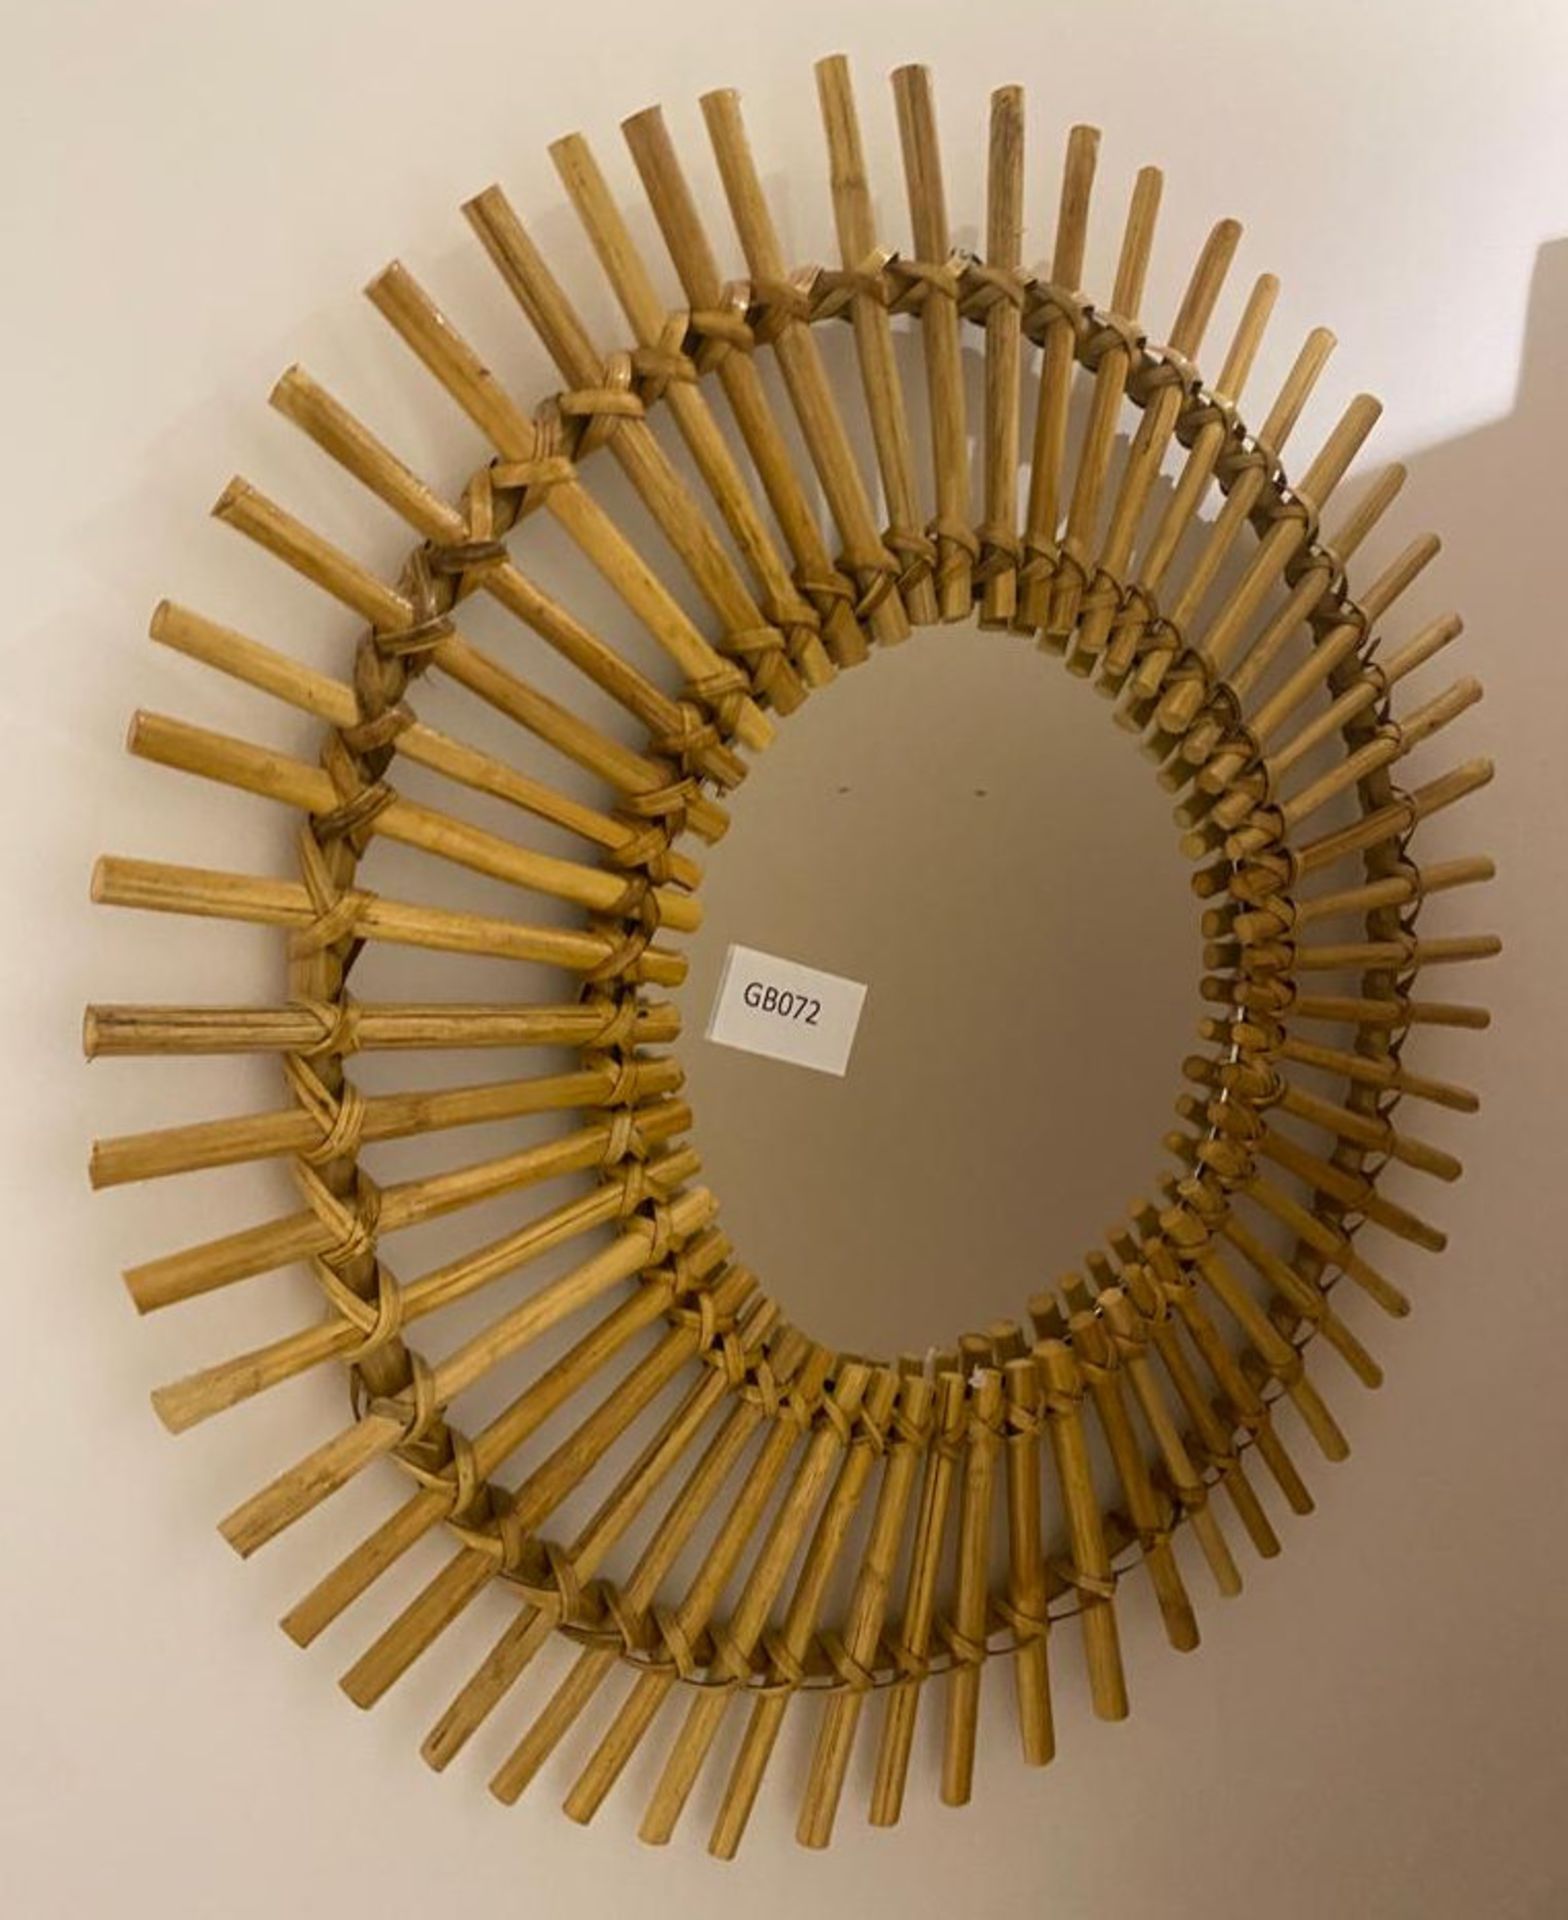 1 x Round Bamboo Mirror - Size: diameter 600mm - CL776 - Ref: GB072 - Location: London W1WFrom a